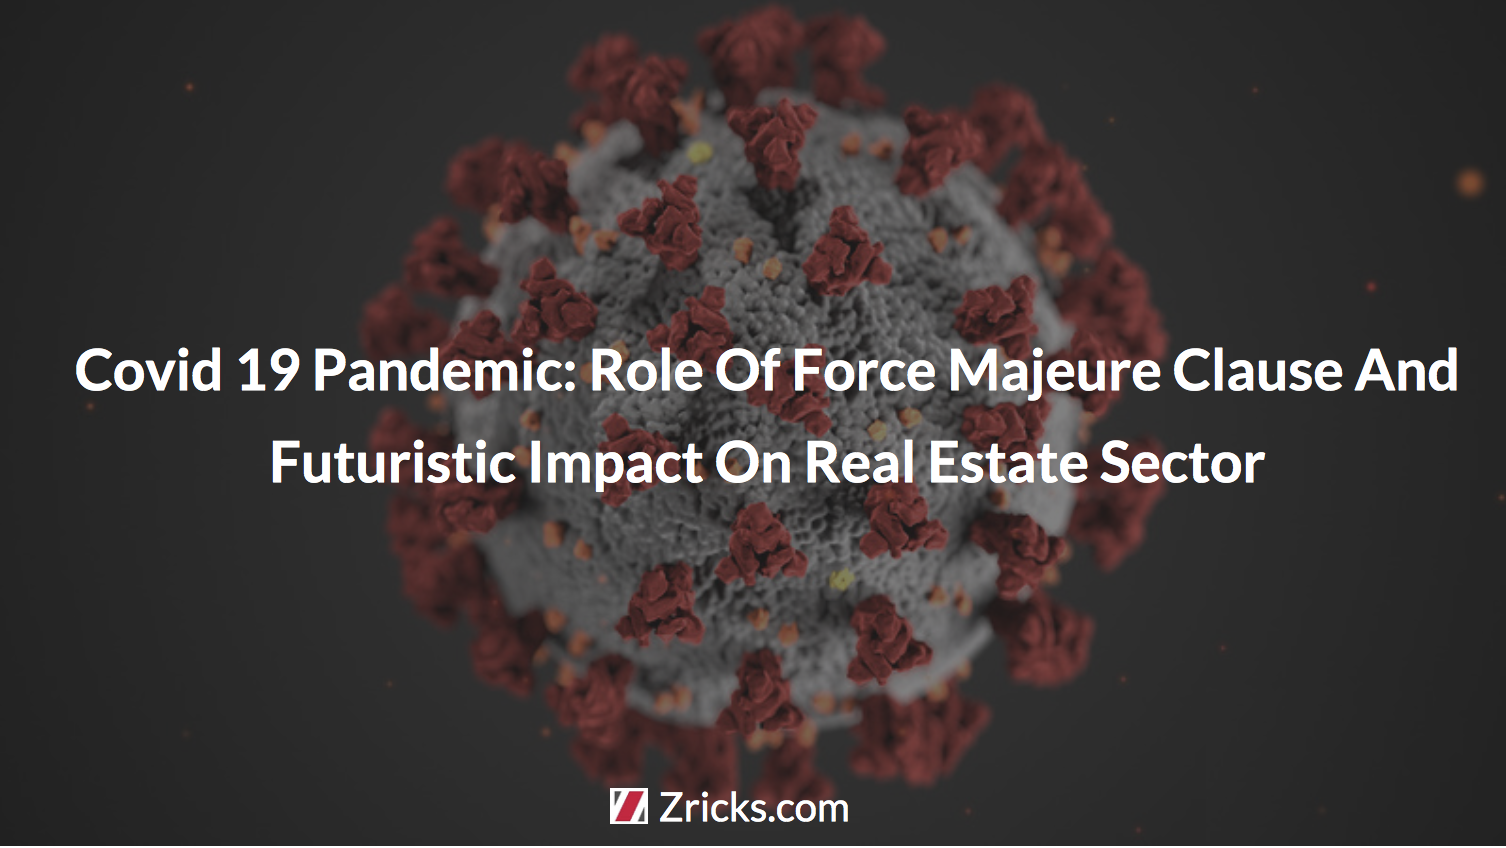 Covid 19 Pandemic: Role Of Force Majeure Clause And Futuristic Impact On Real Estate Sector Update